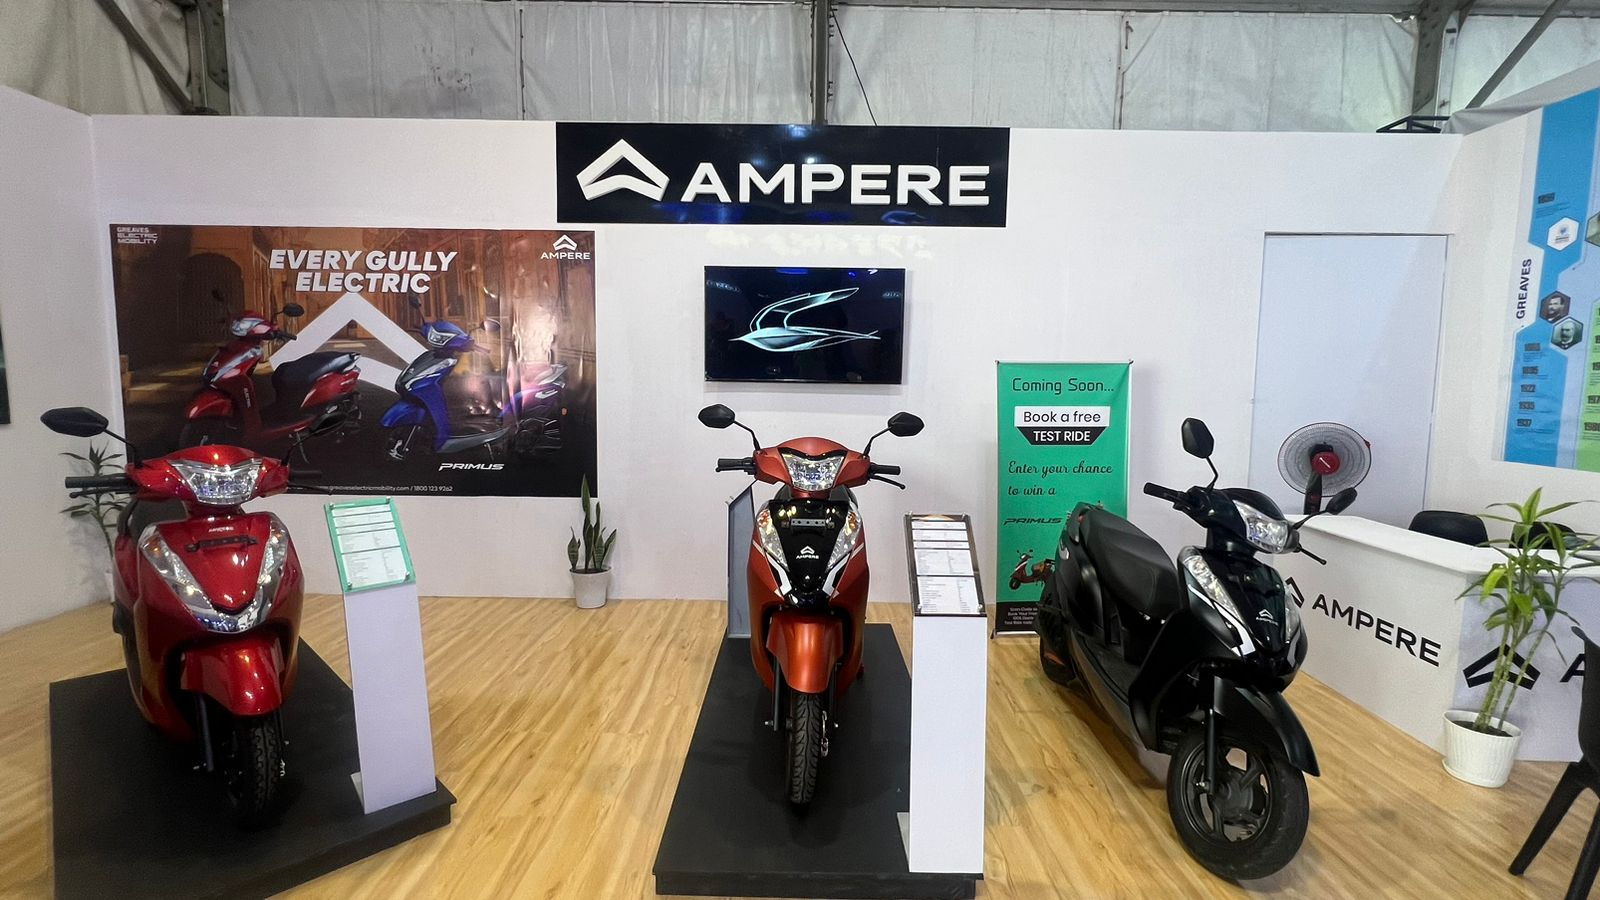 Booking open for Ampere EV scooters in Nepal